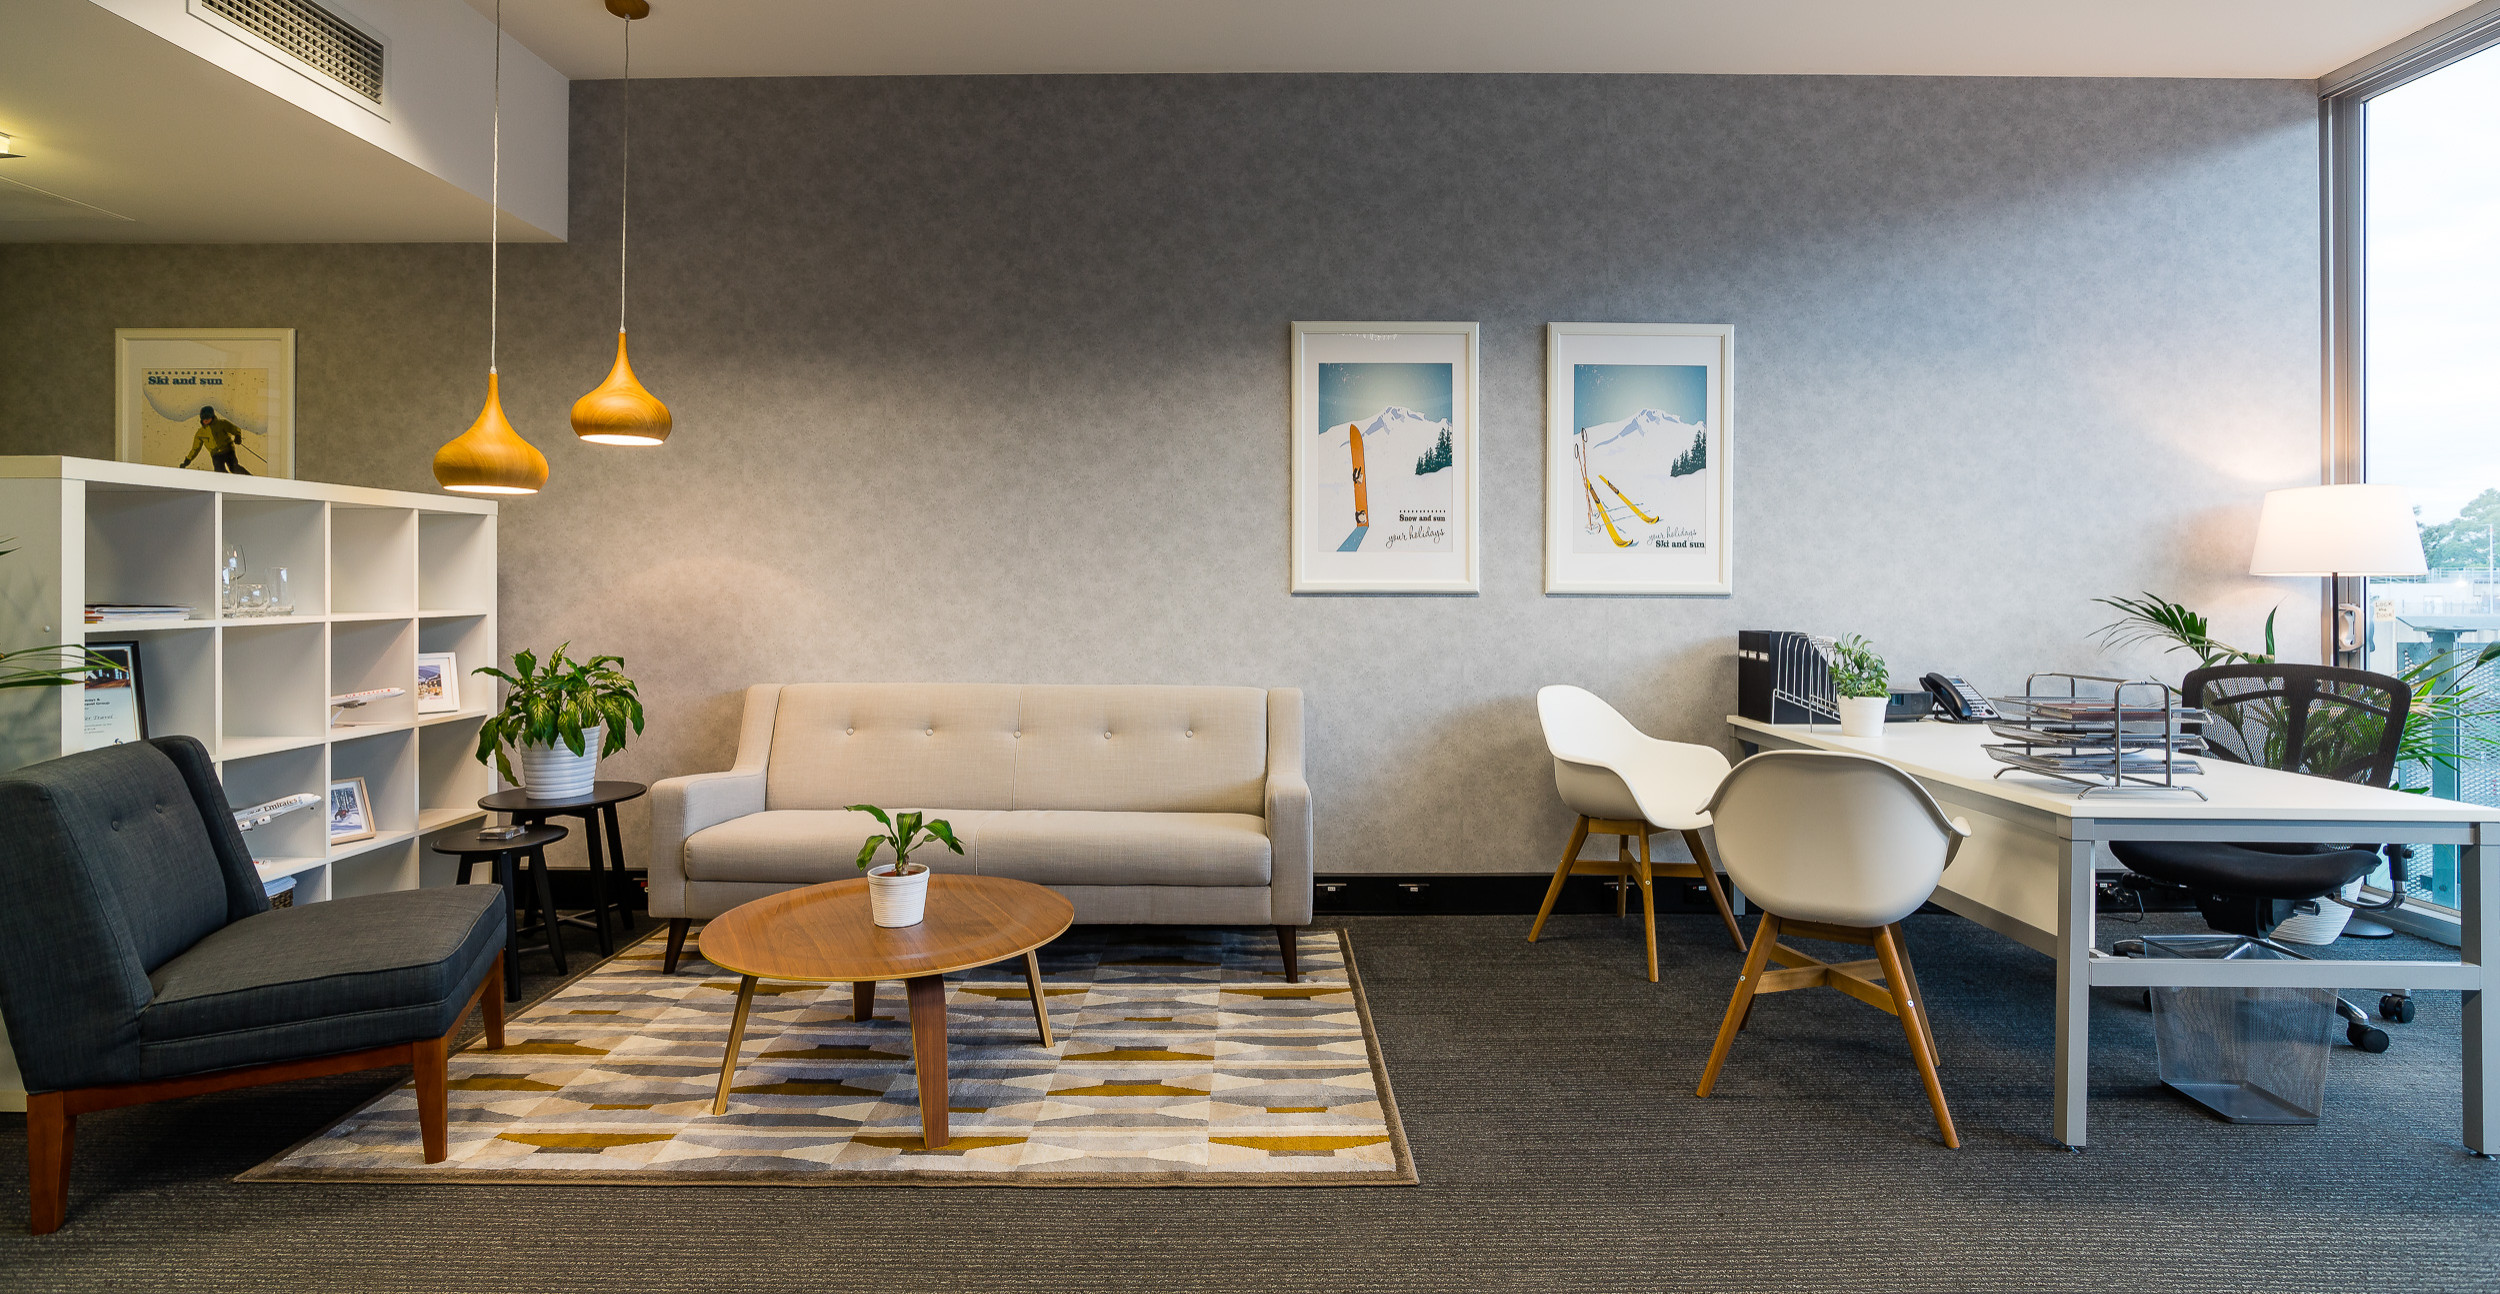 Travel Agency Office - Home Office - Sydney - by Design Hive Co. | Houzz